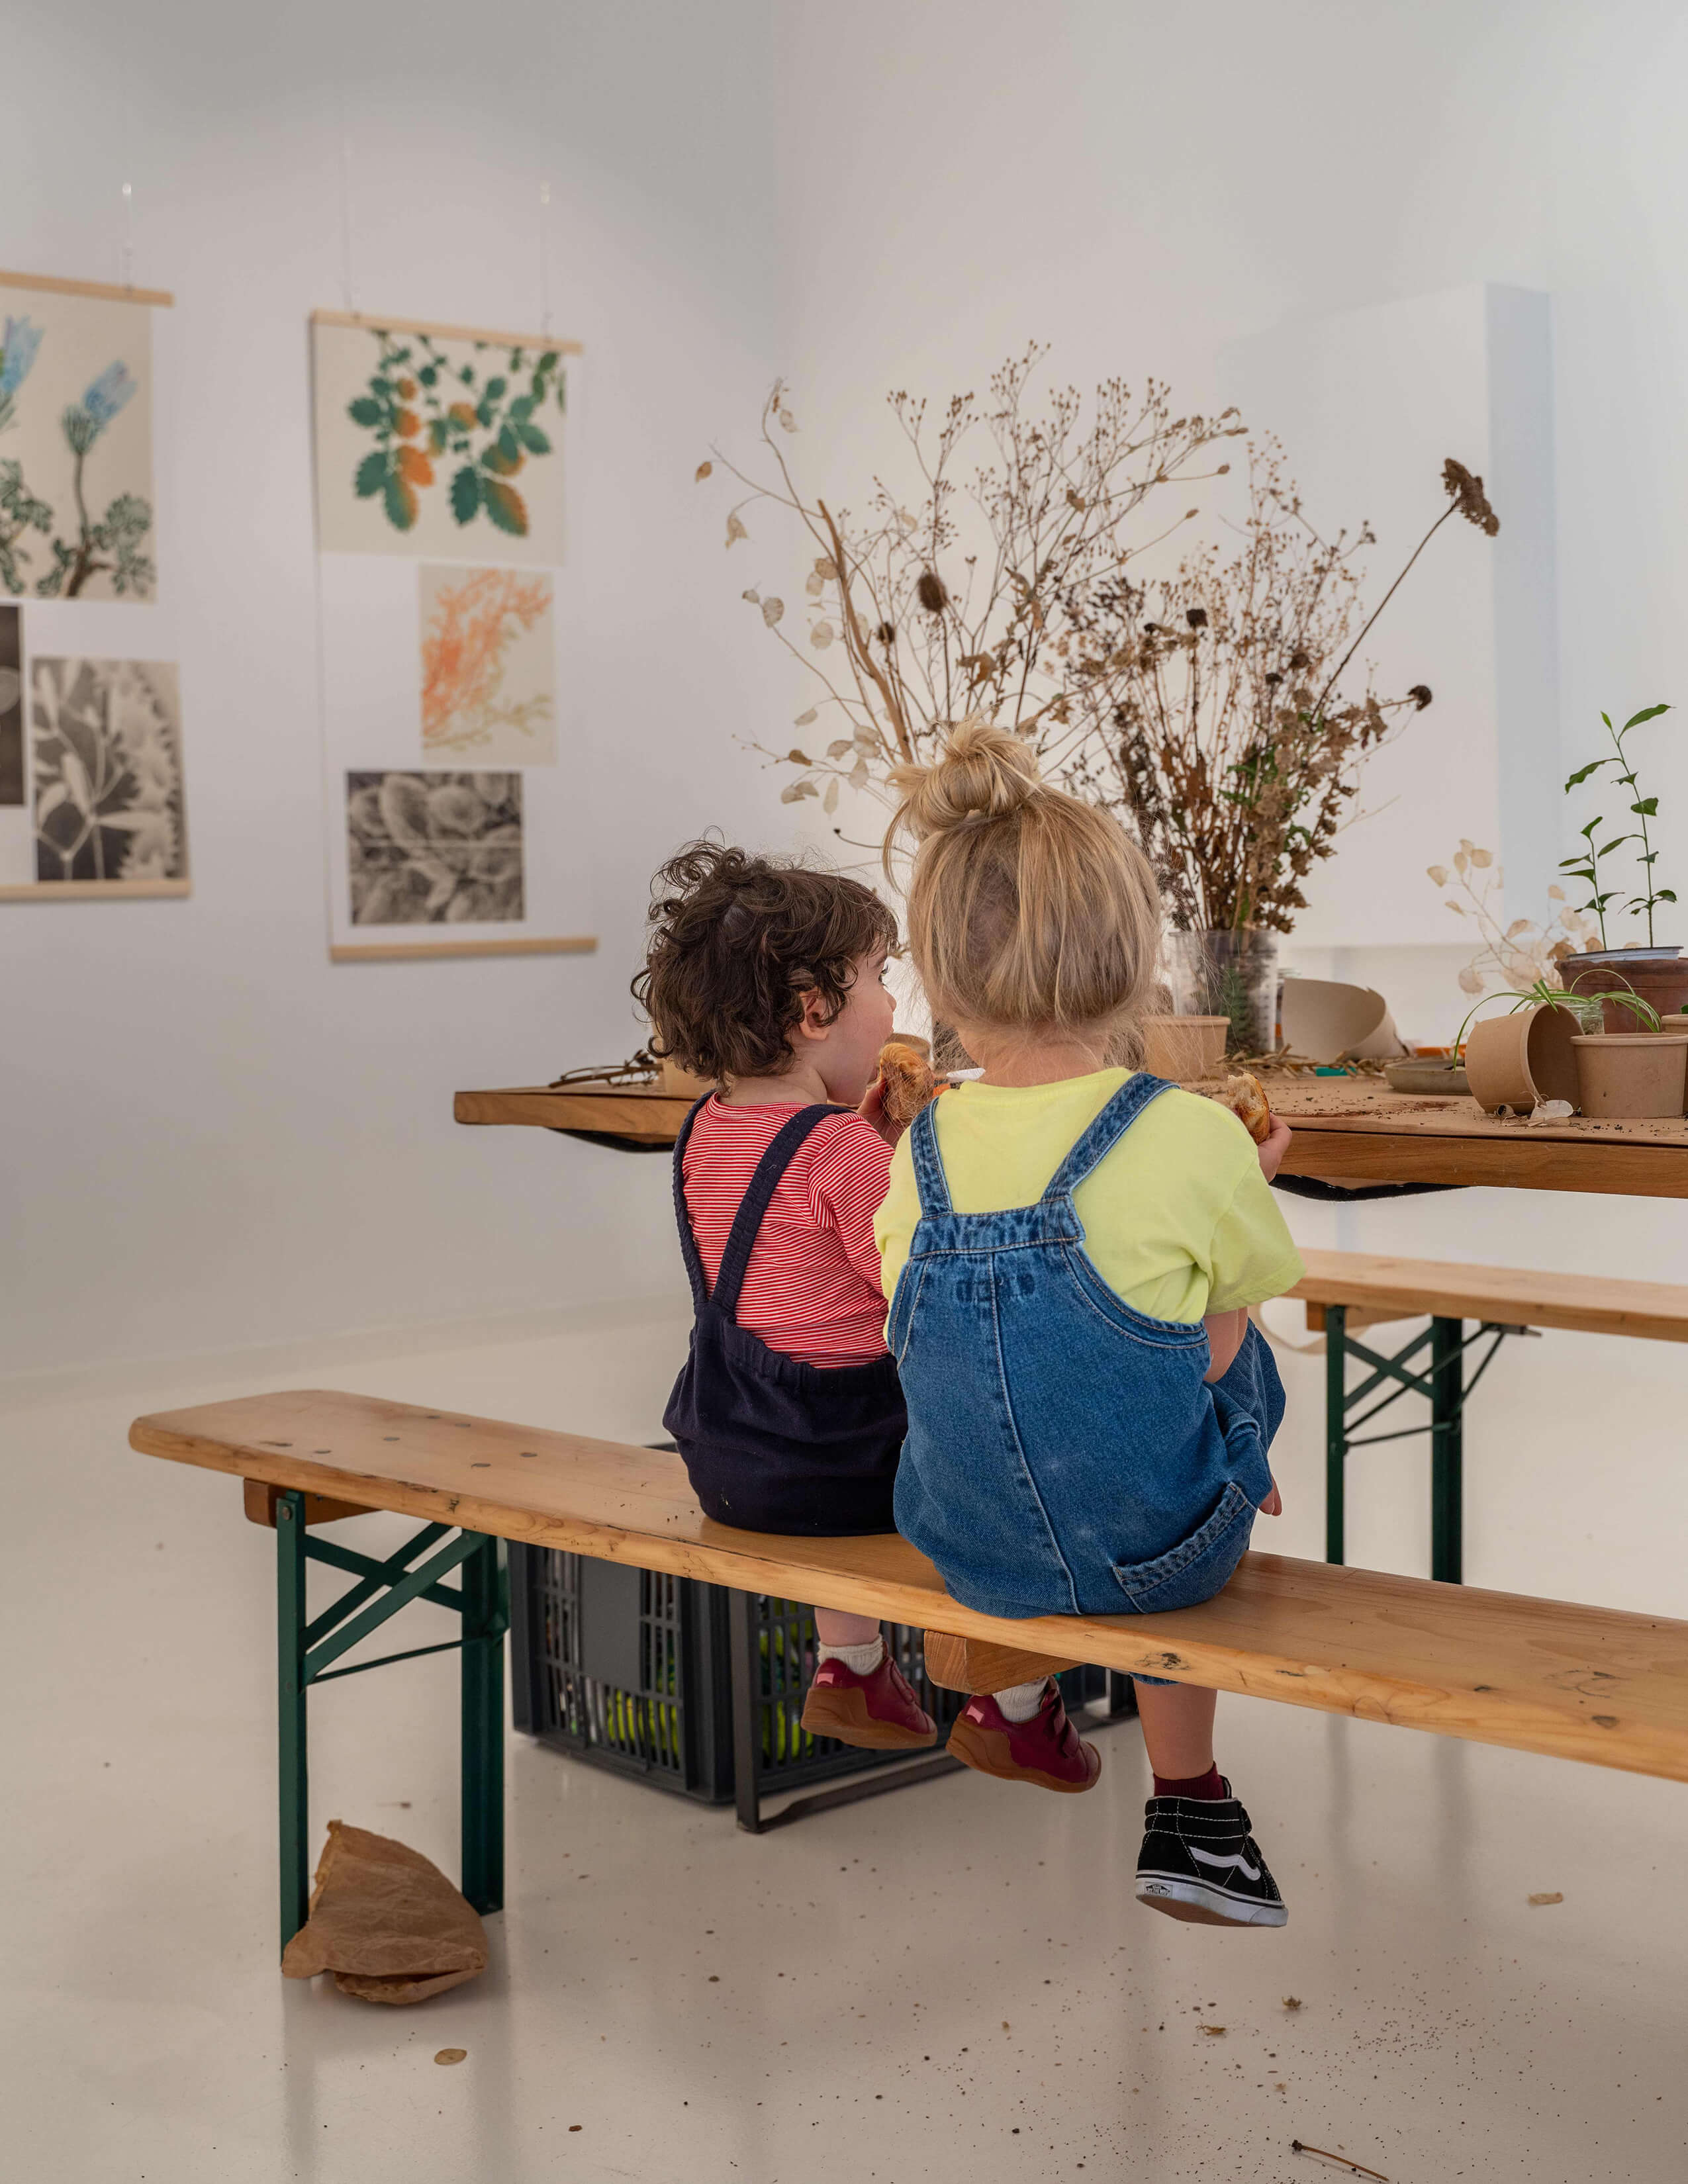 Children sitting on the bench have fun understanding the life cycle of a plant in an educational workshop. Paintings on the wall and potted plants are presented on the table.